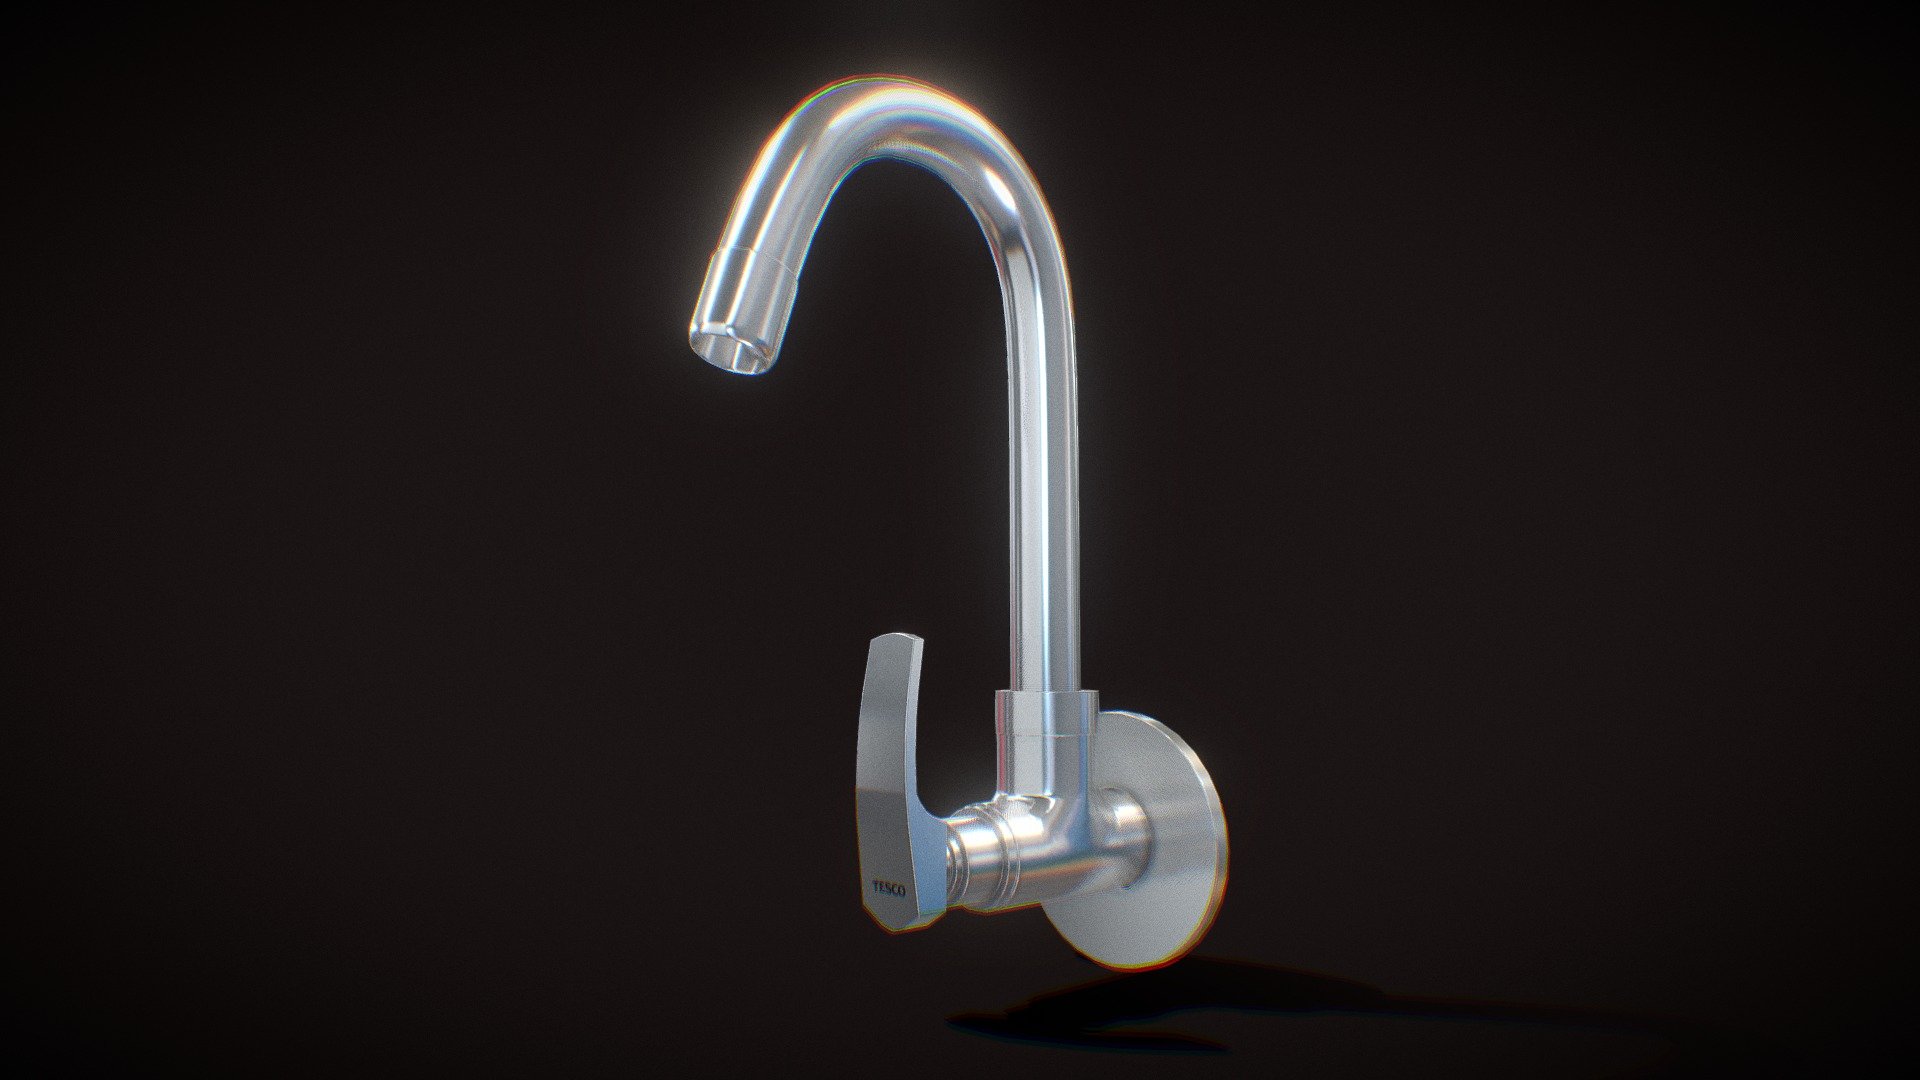 TRESCO sink TAP 3d model ready for VirtualReality(VR),Augmented Reality(AR),games and other render engines.This lowpoly 3d model is baked with 4k resolution textures.The PBR_Maps includes- albedo,roughness,metallic and normal 3d model